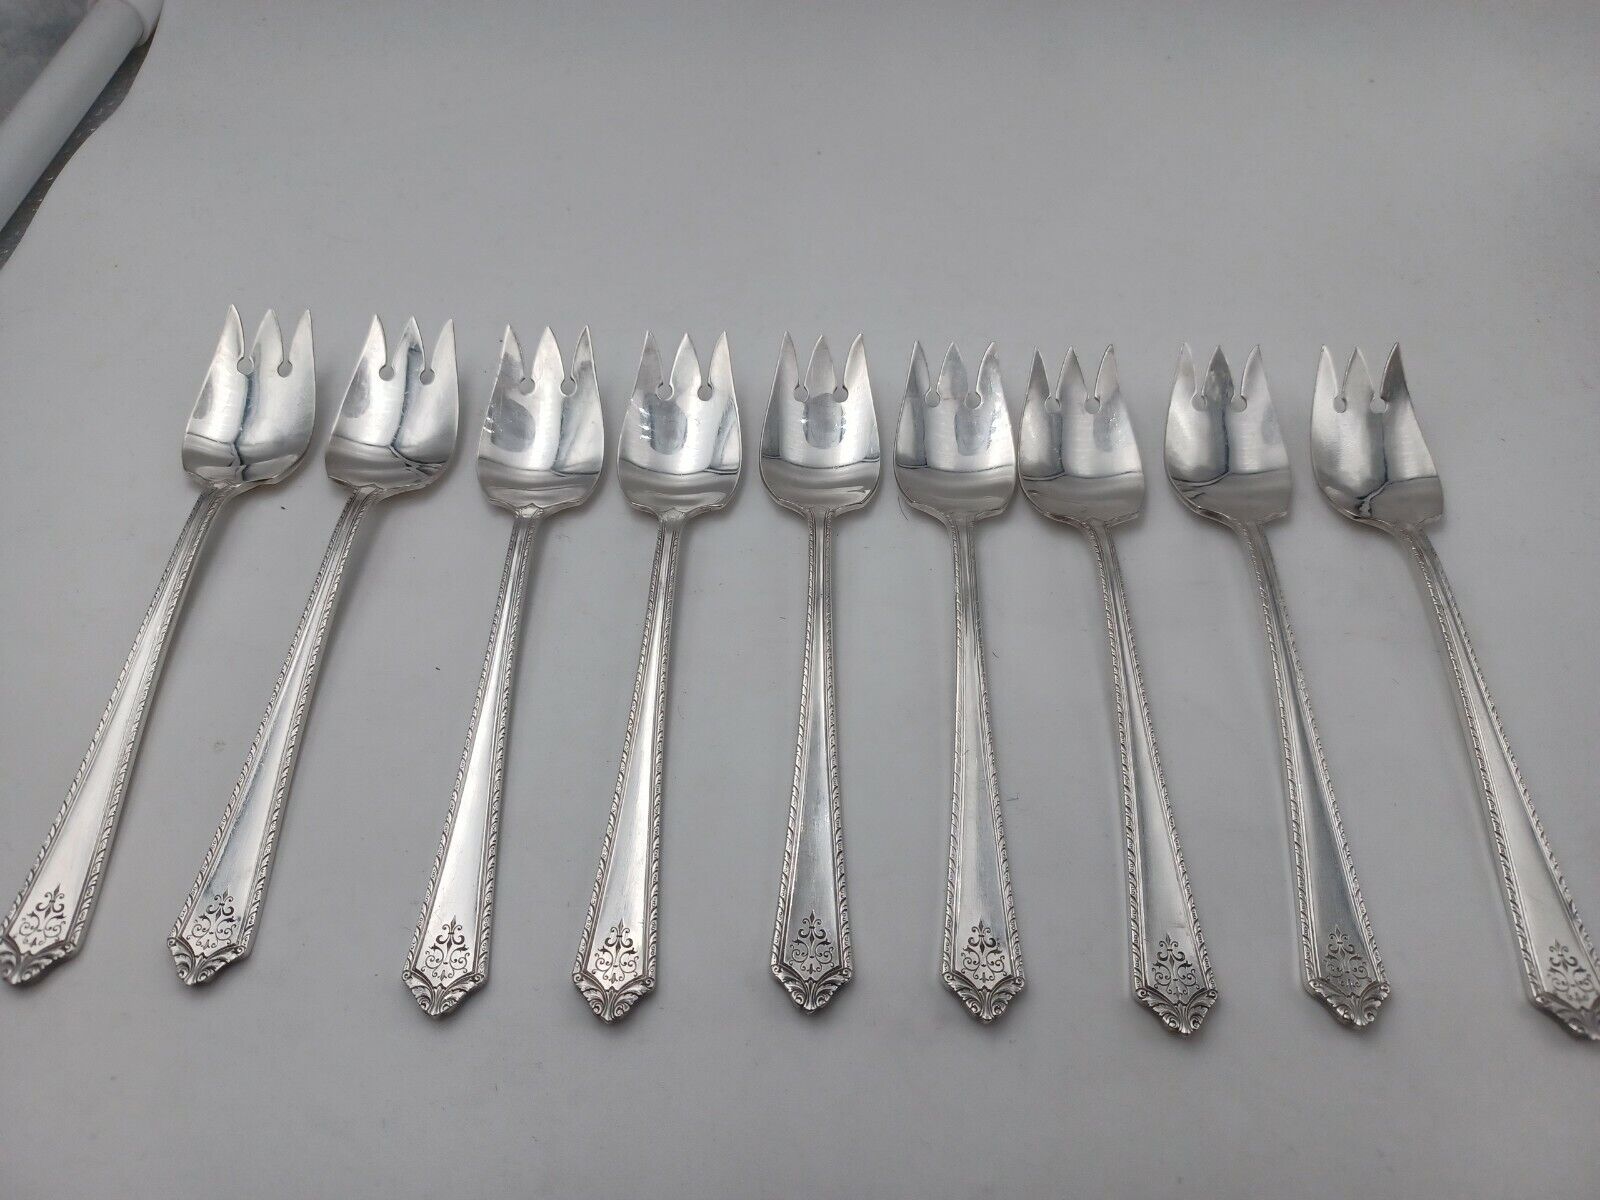 Lot of 9 Ice Cream Forks by Holmes & Edward Pageant Silverplate 5 3/8"